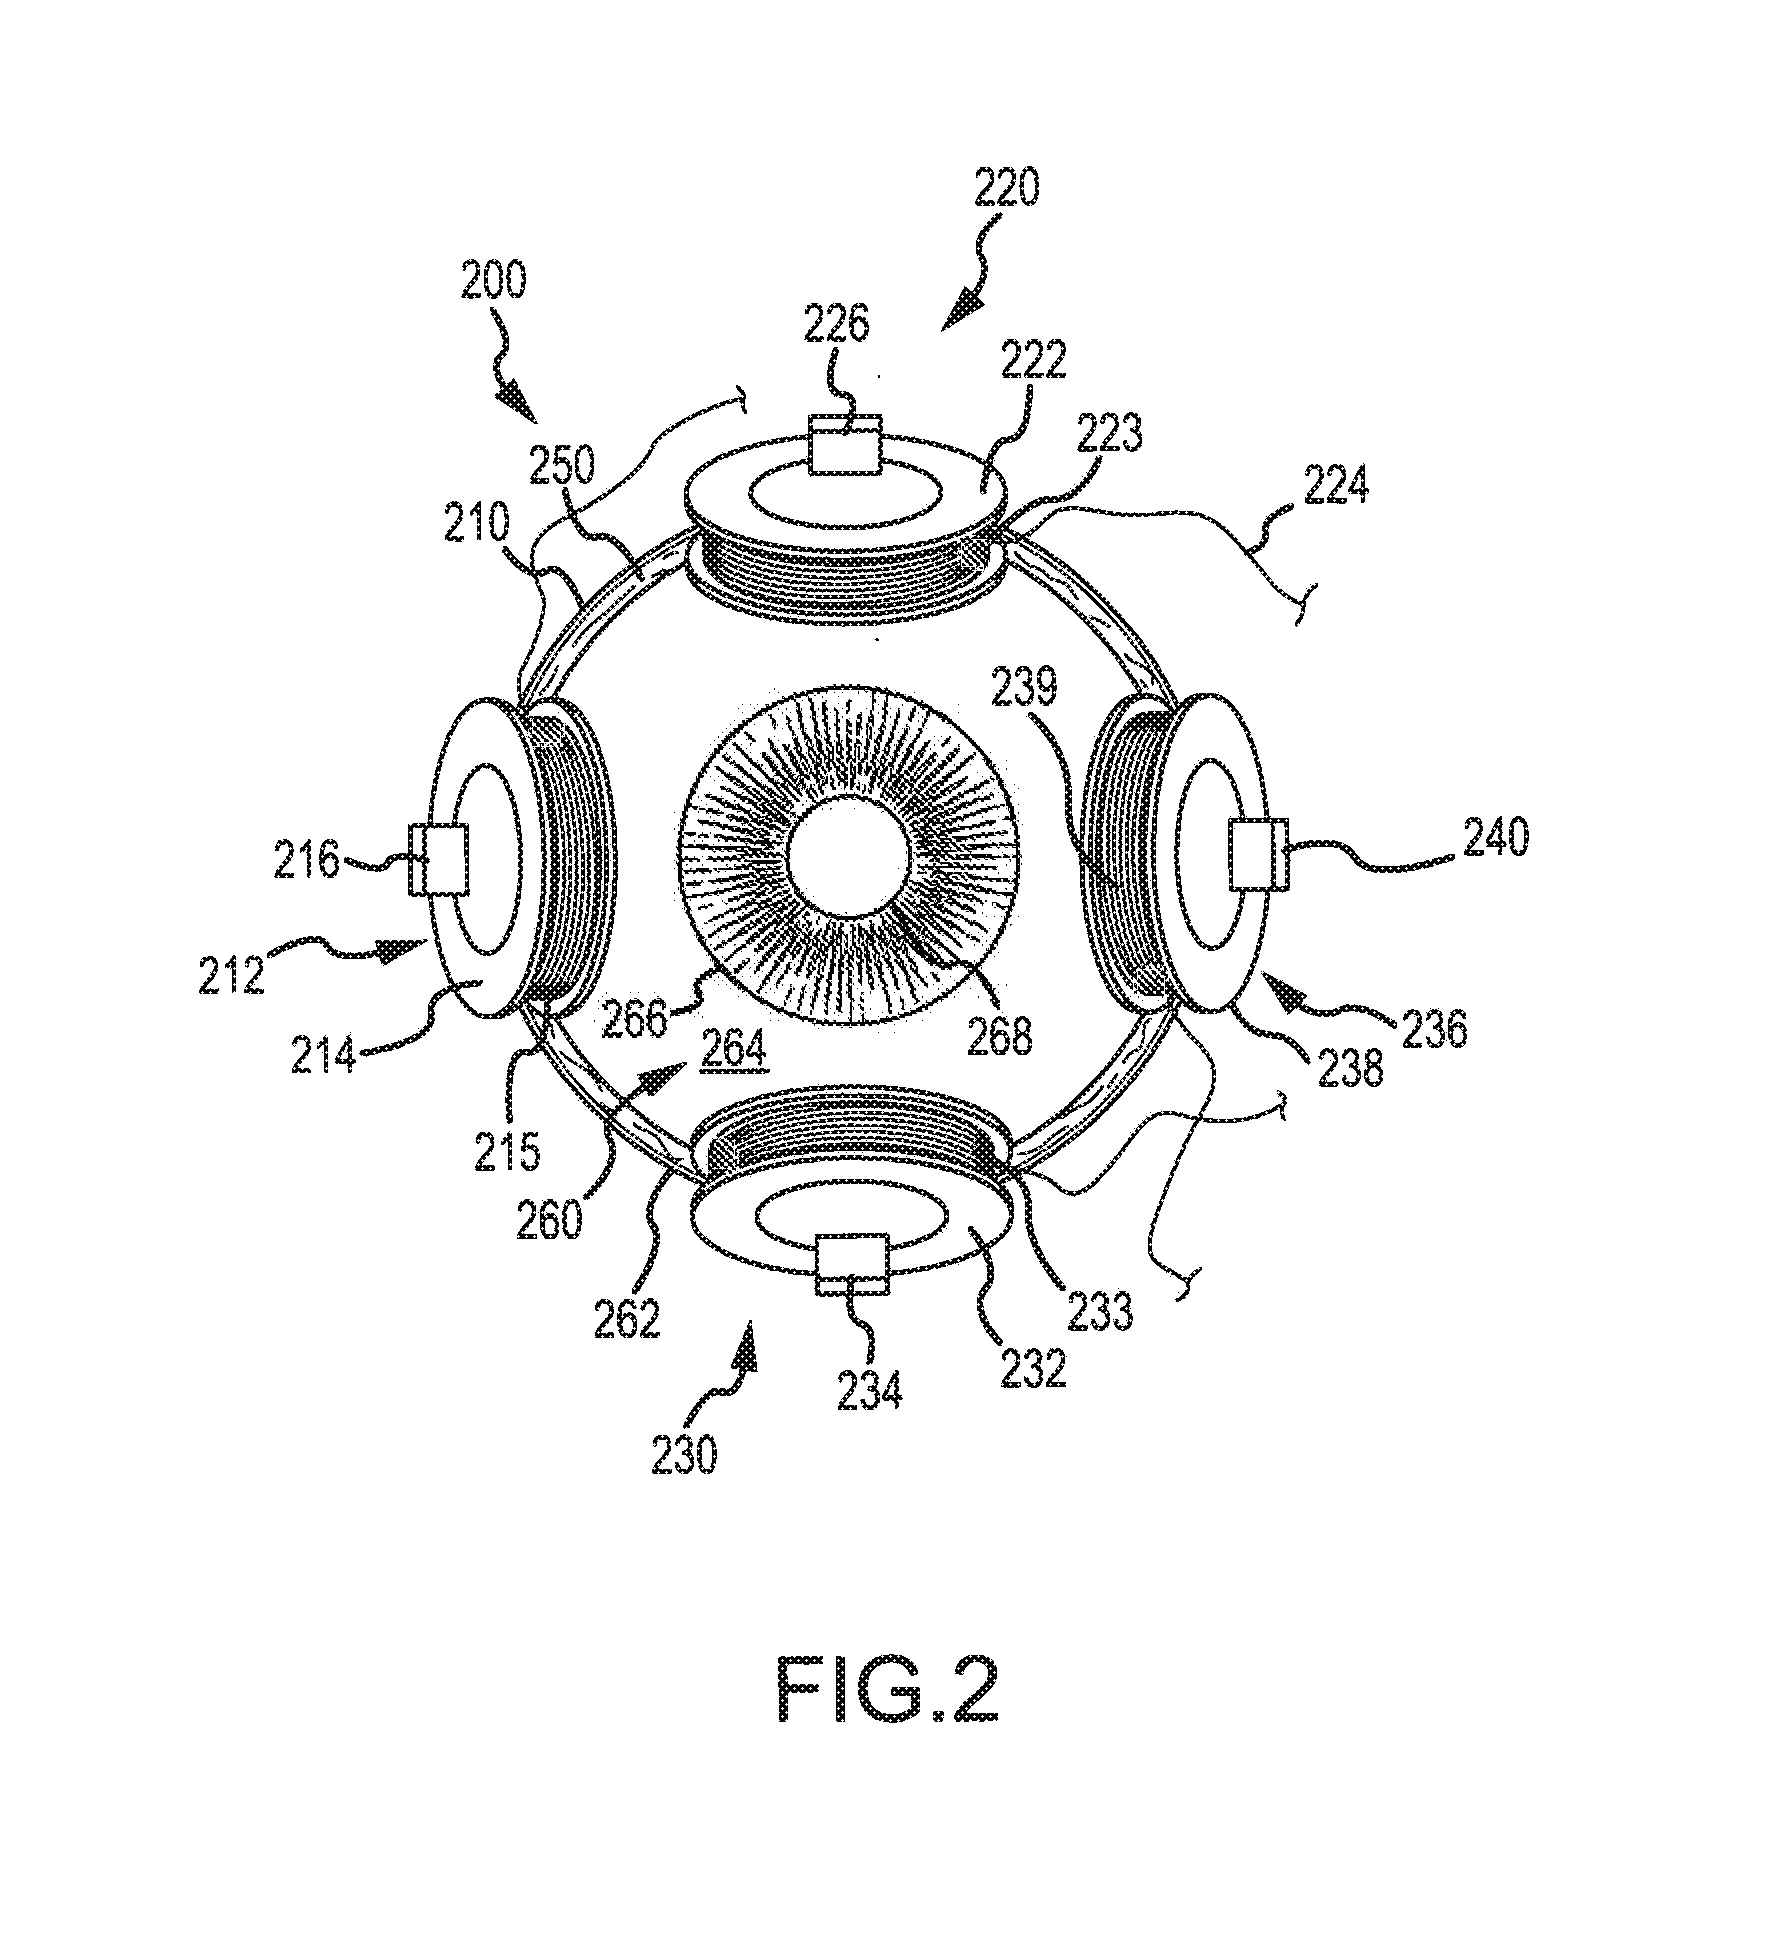 Animatronic eye with an electromagnetic drive and fluid suspension and with video capability